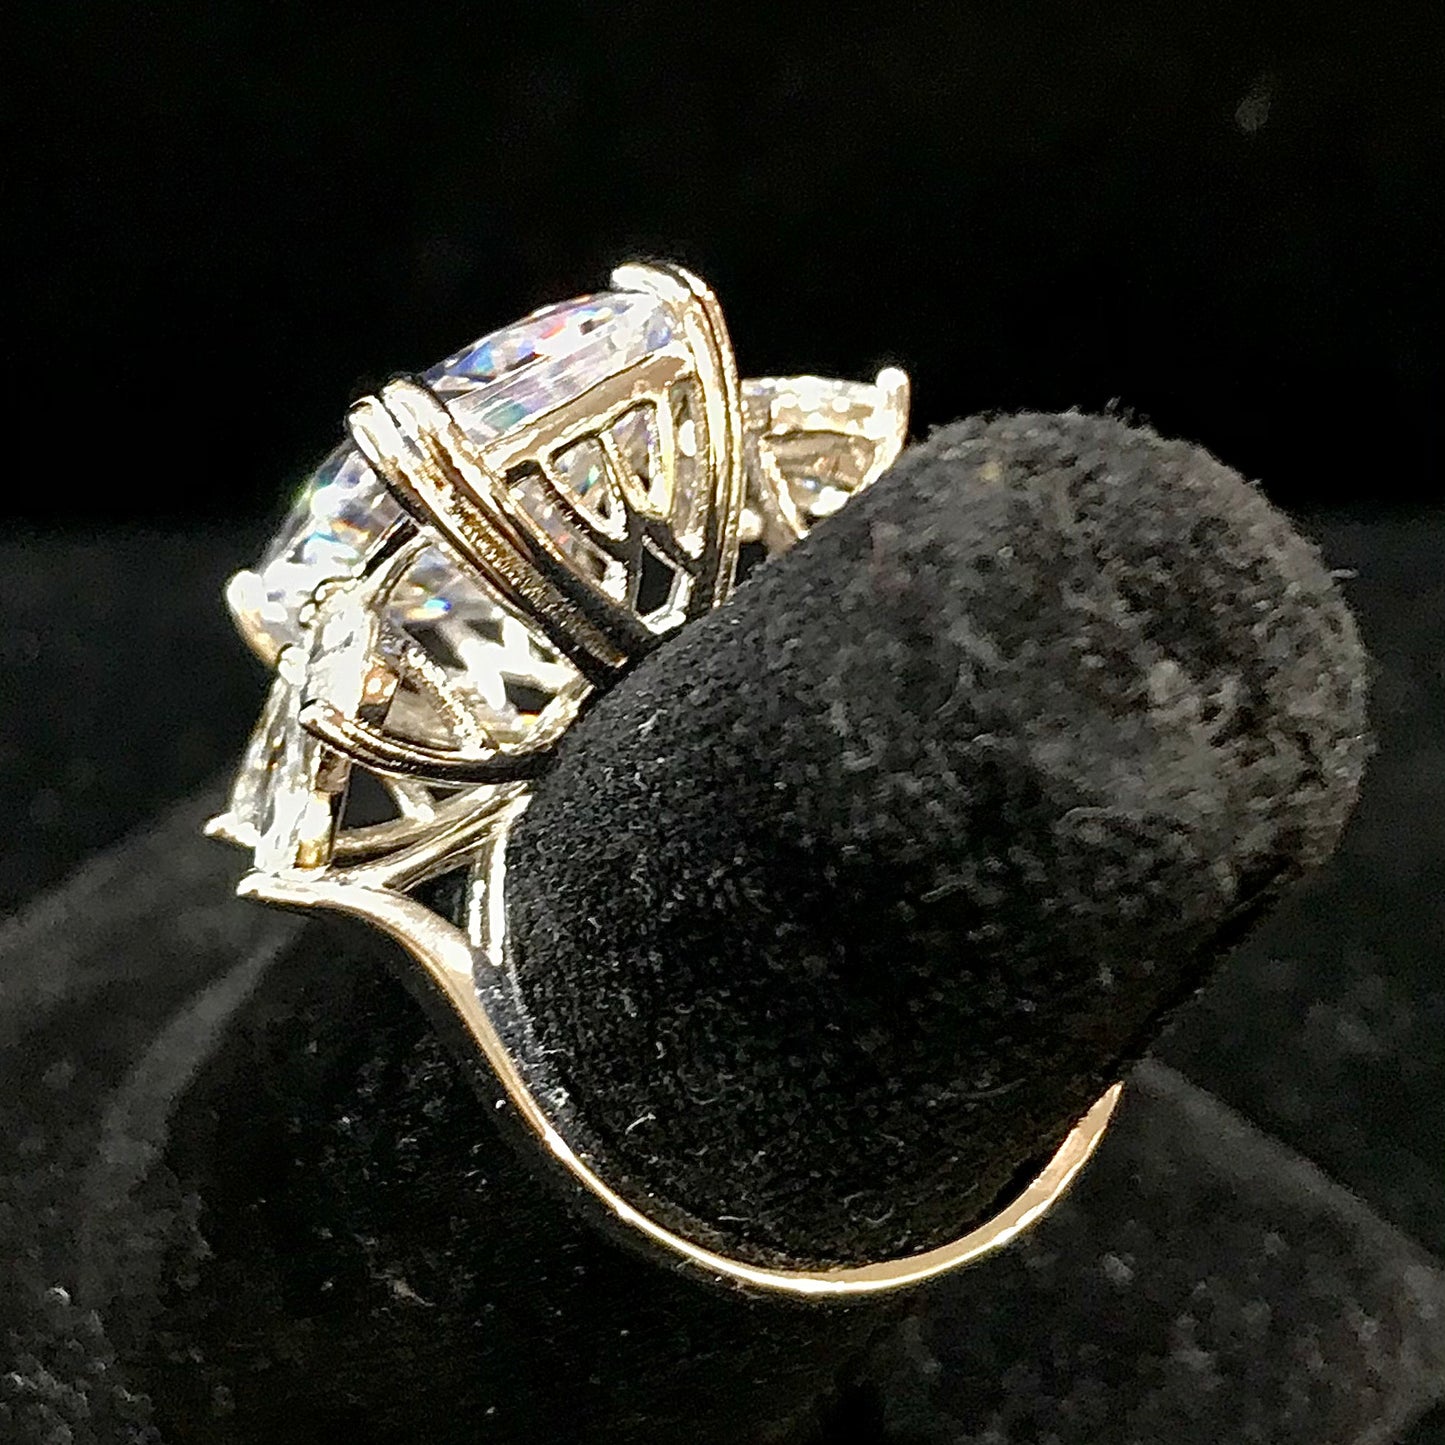 Winged white cubic zirconia ring set in sterling silver.